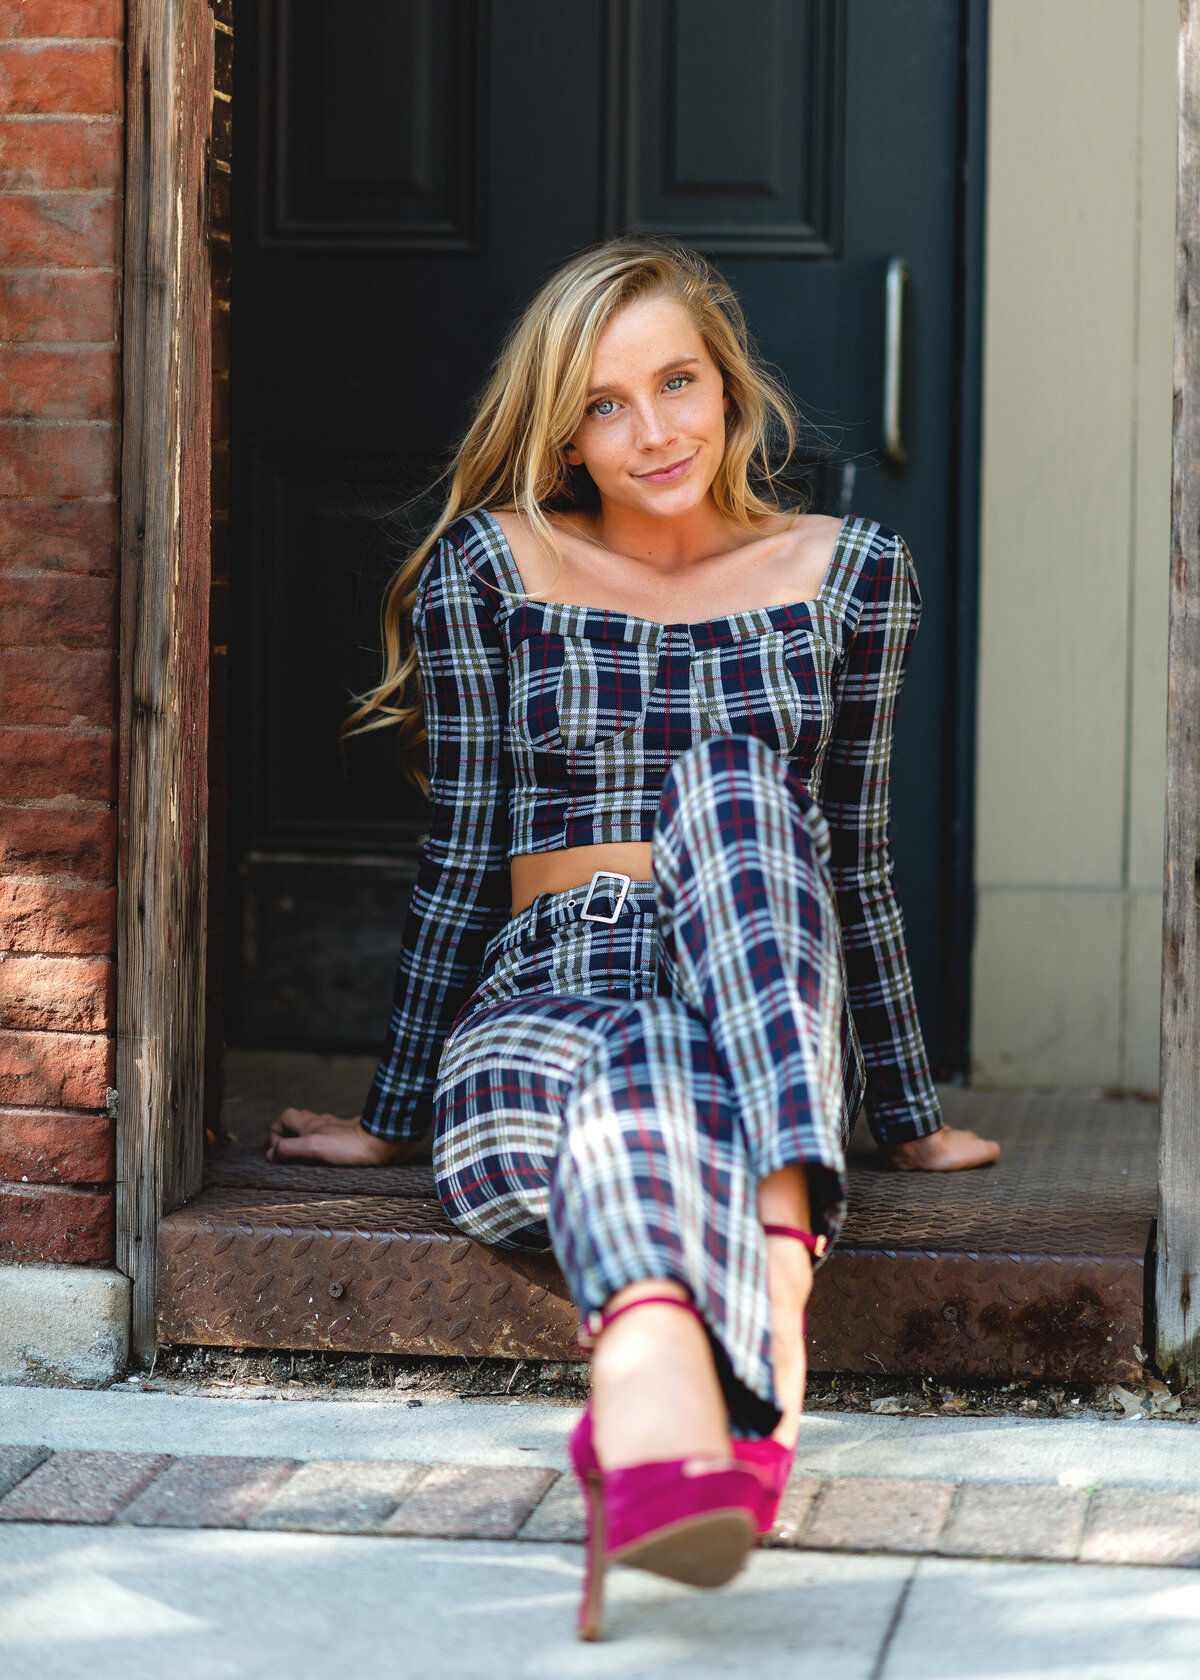 Des-Moines-Iowa-Senior-Theresa-Schumacher-Photography-Girl-Urban-Downtown-Pink-Shoes-Free-People